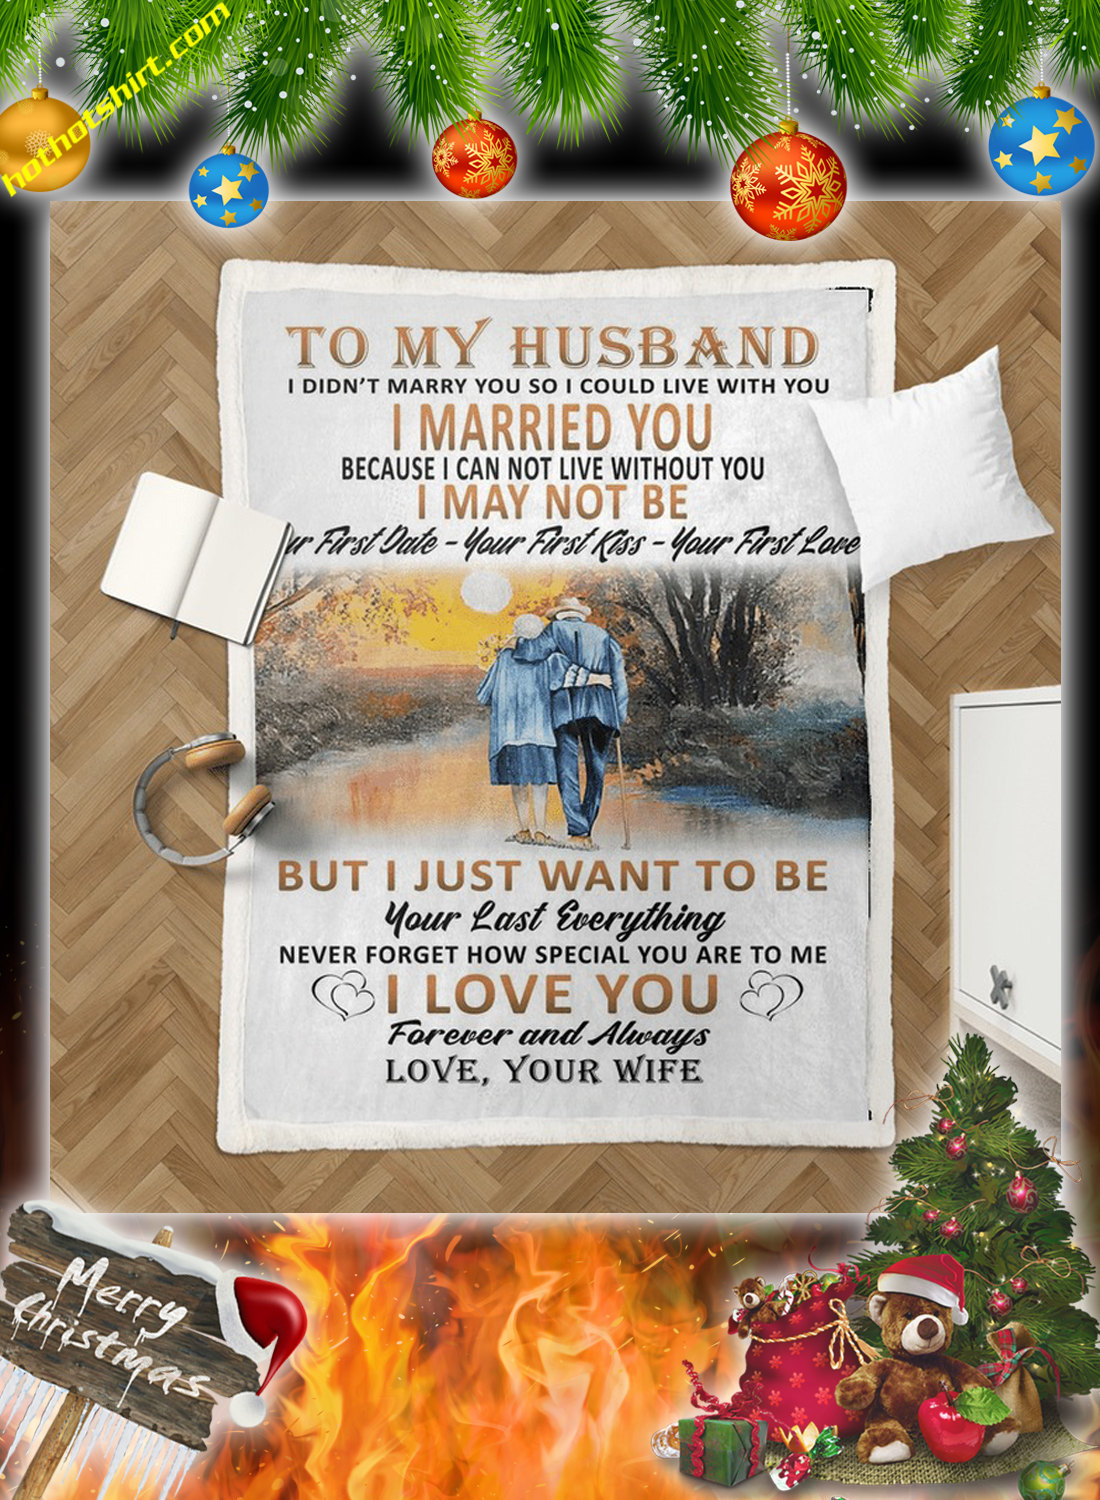 To my husband i didn't marry you so i could live with you your wife quilt 1